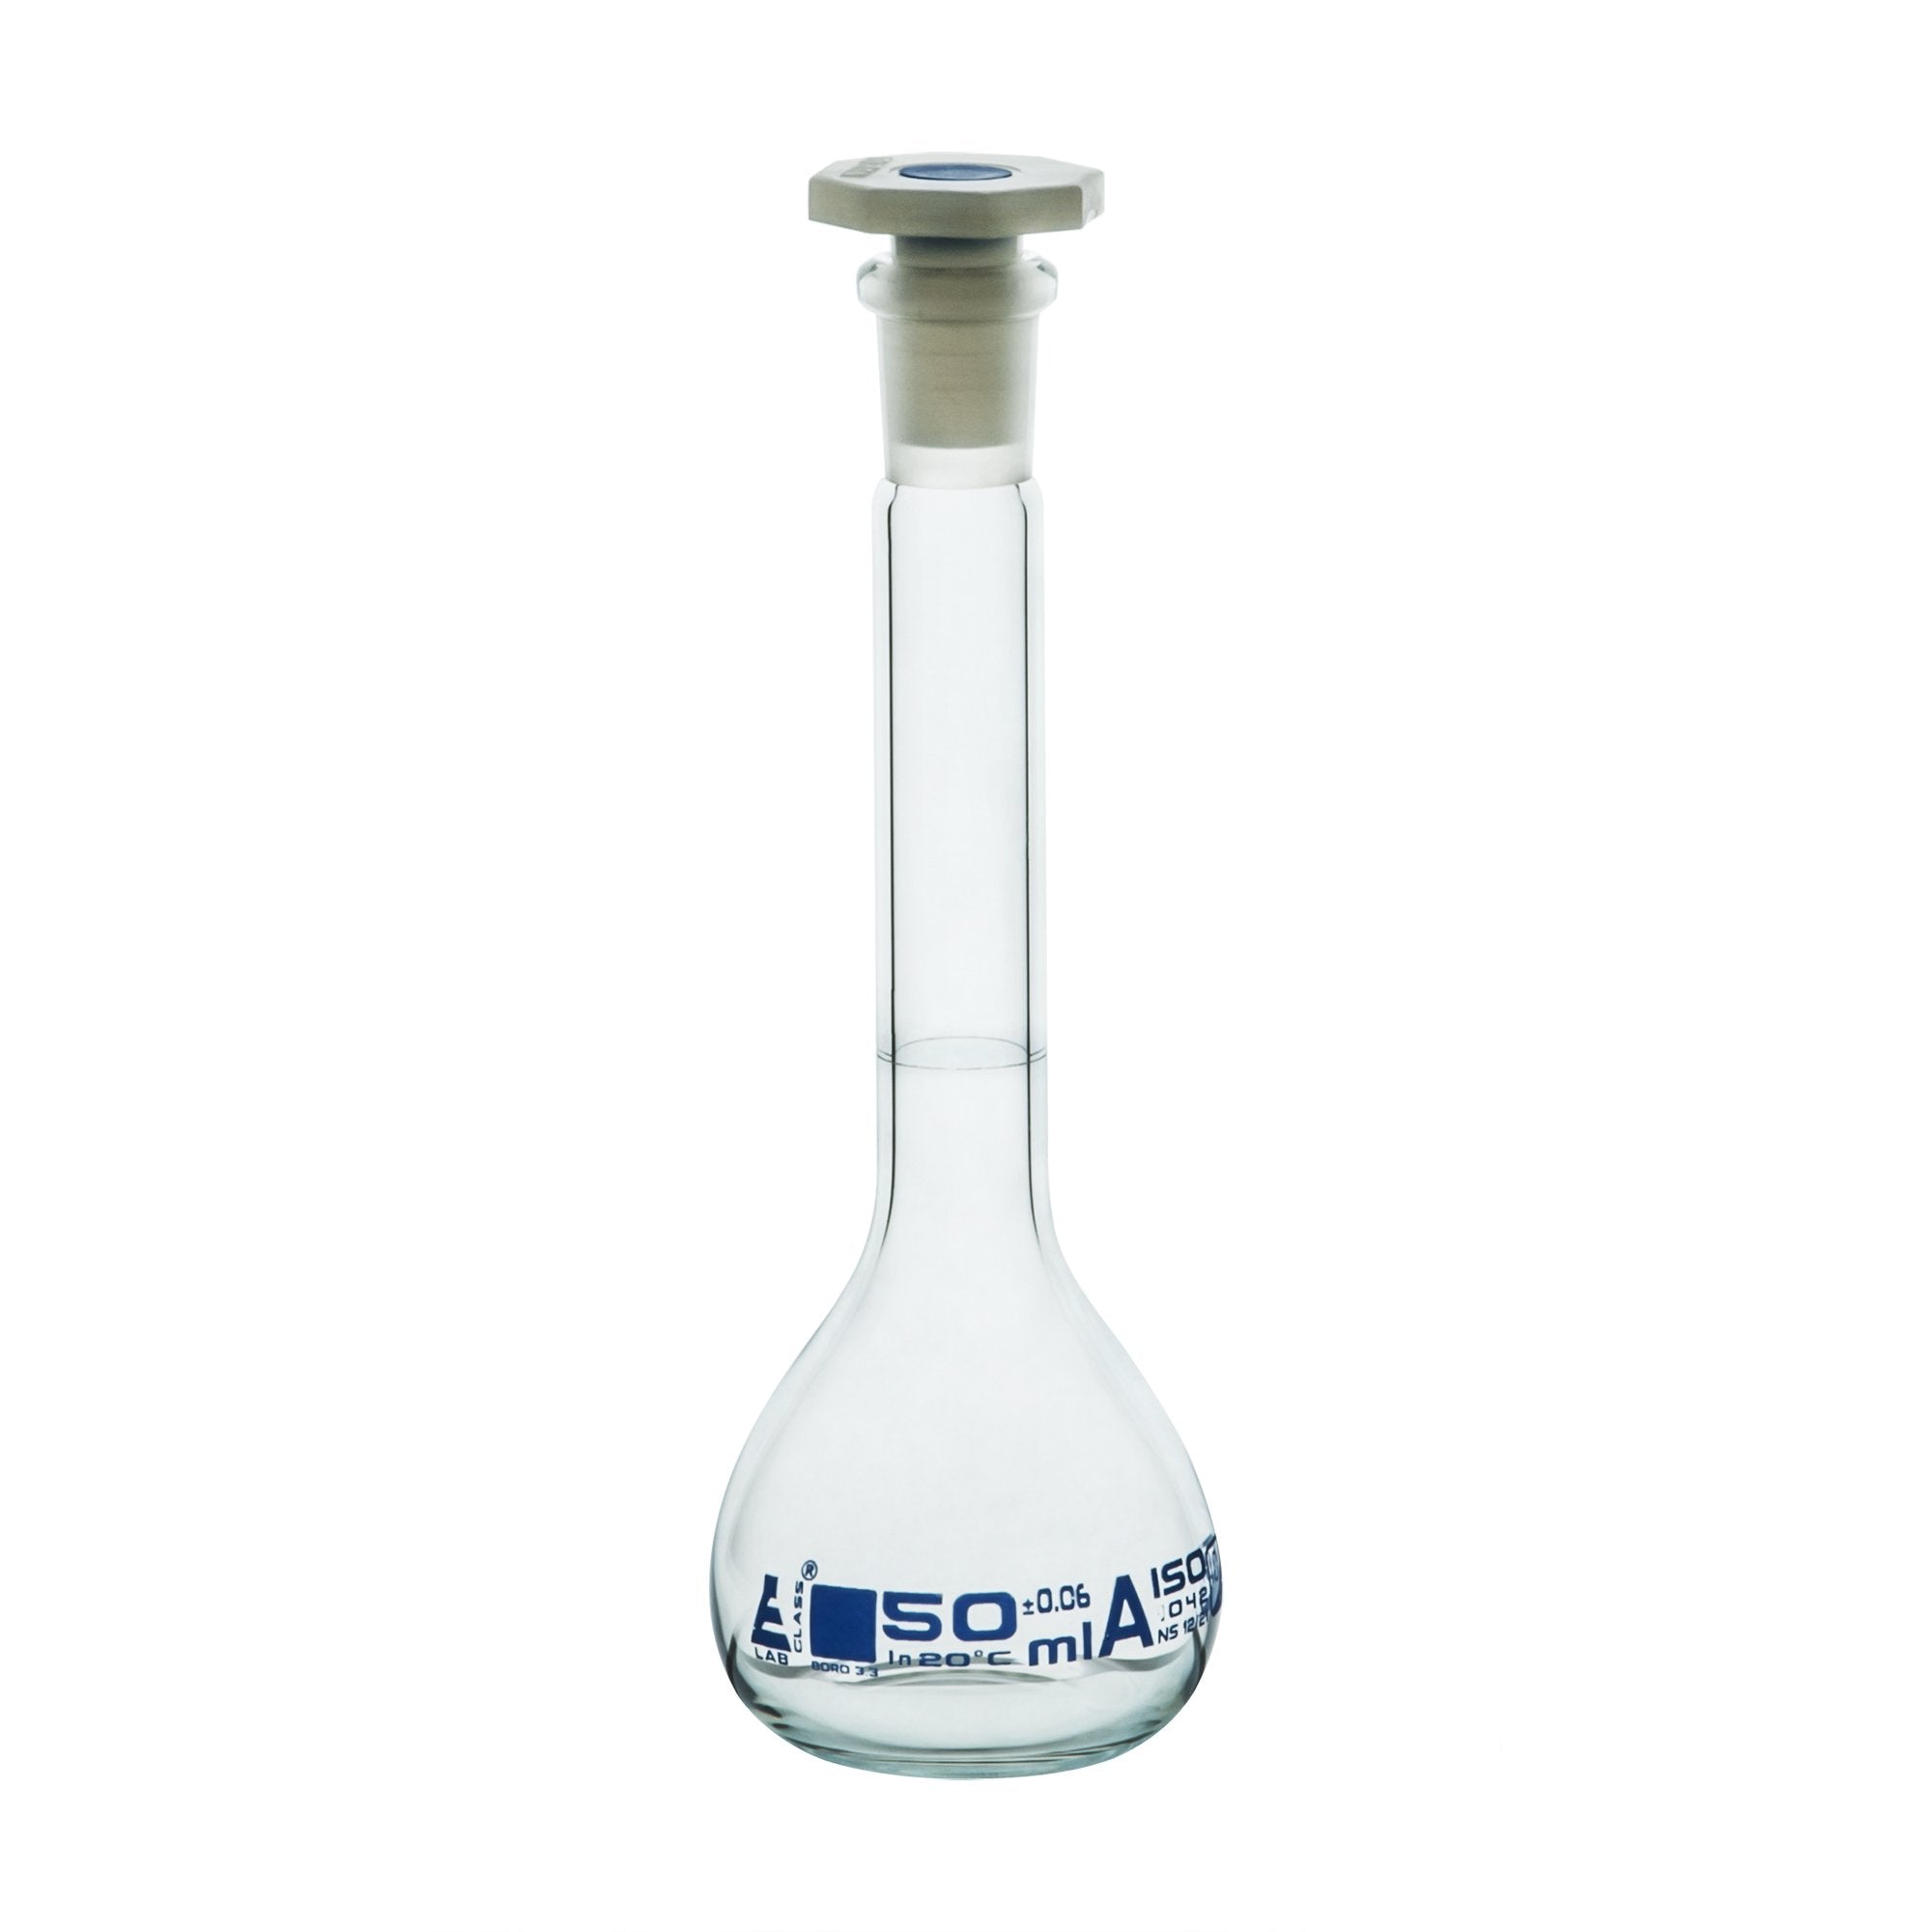 Borosilicate Glass Volumetric Flask with Polypropylene Stopper, 50 ml, Class A with Individual Work Certificate, Pack of 2,  Autoclavable